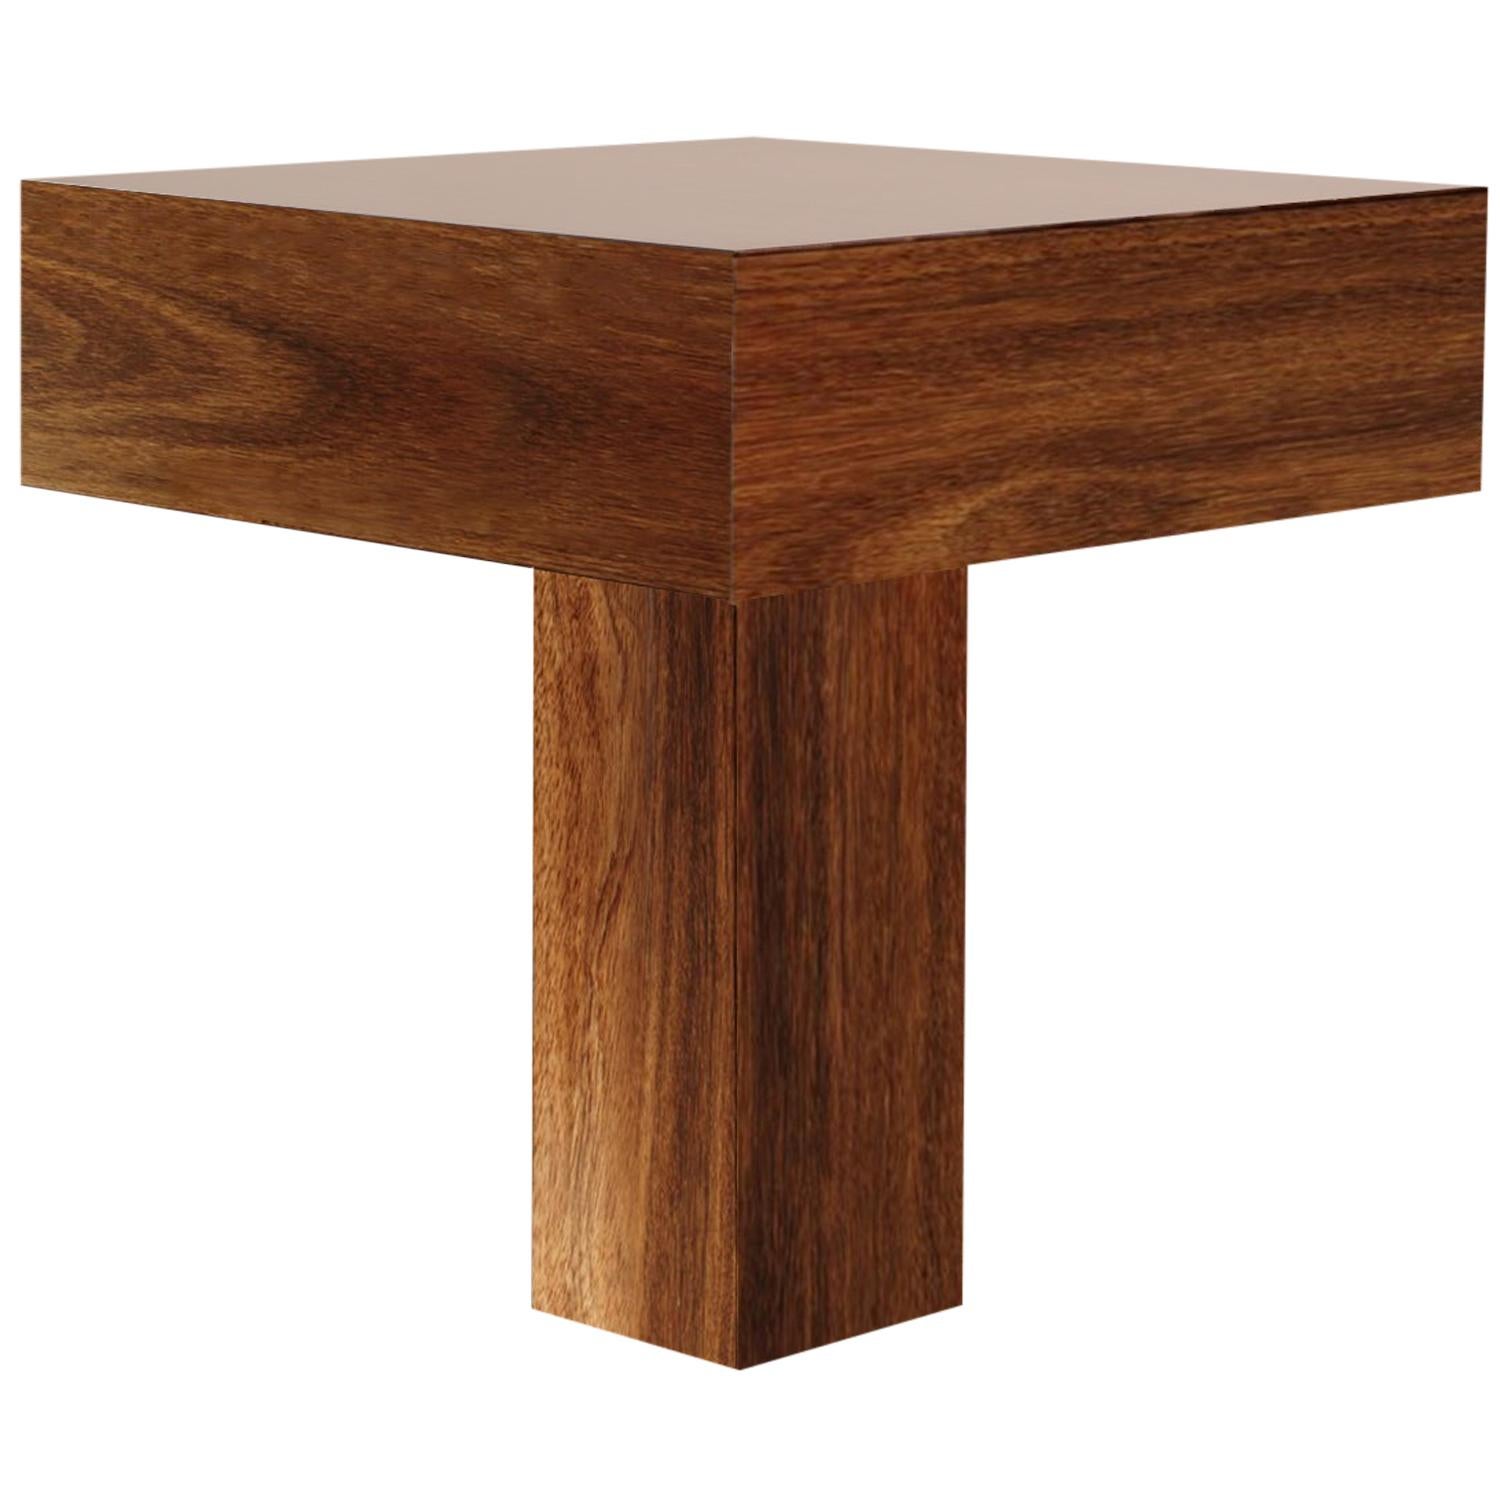 Contemporary Minimalist Side Table "Tee" Made of Brazilian Wood